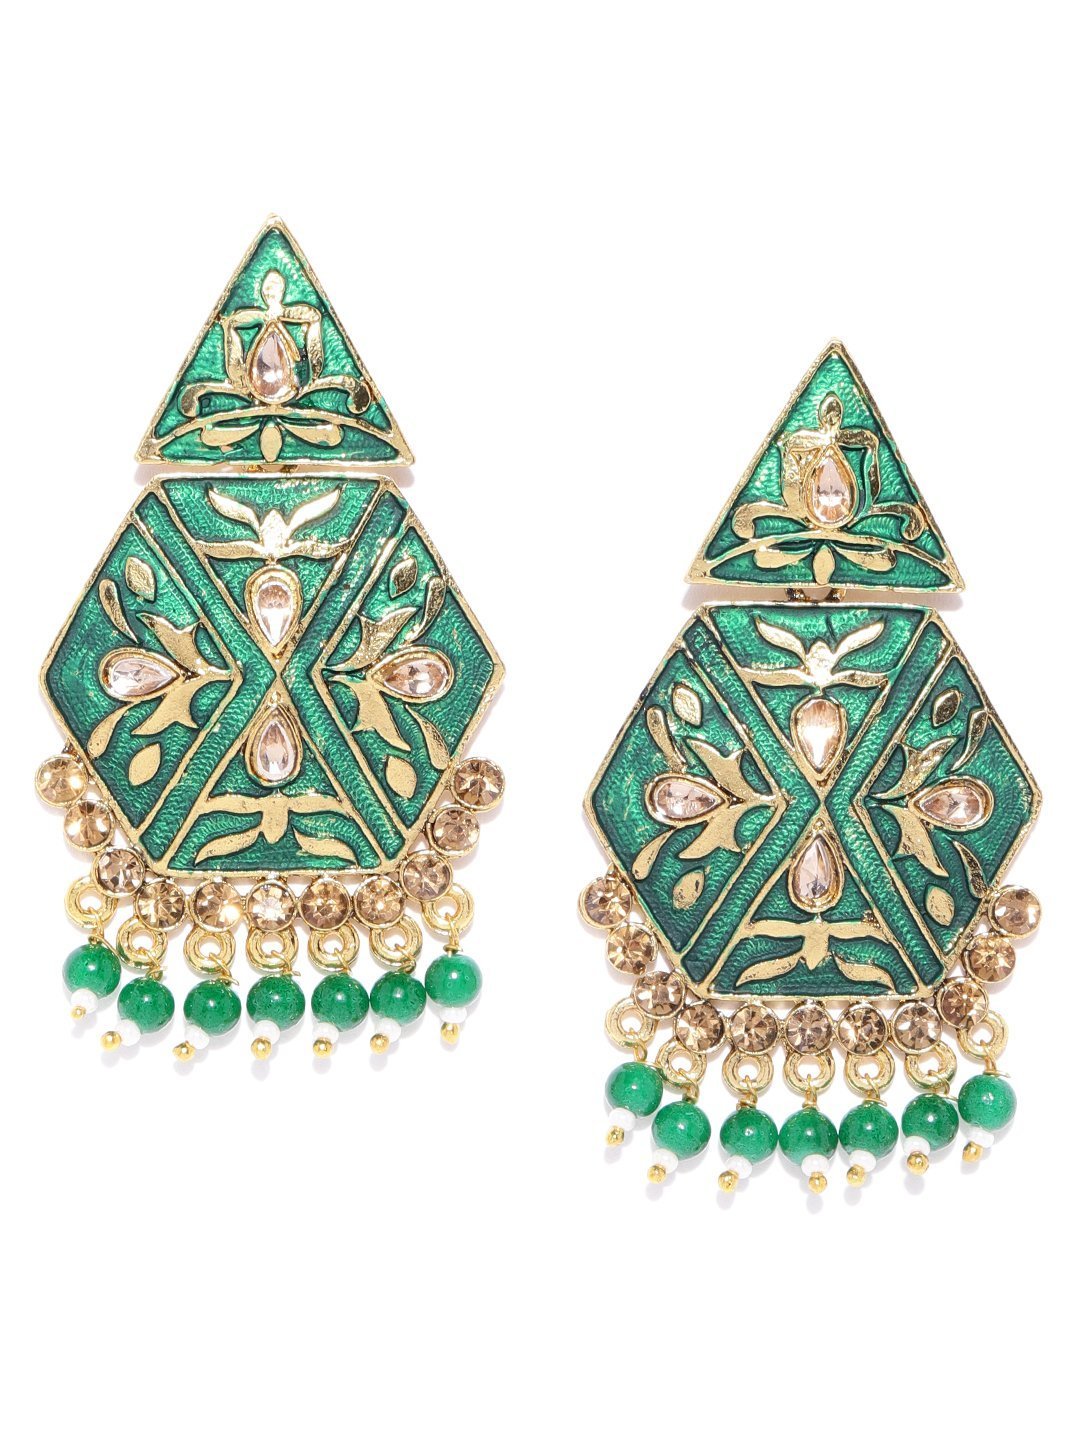 Women's Gold-Plated Stone Studded, Geometric Inspired Drop Earrings with Beads Drop in Green Color - Priyaasi